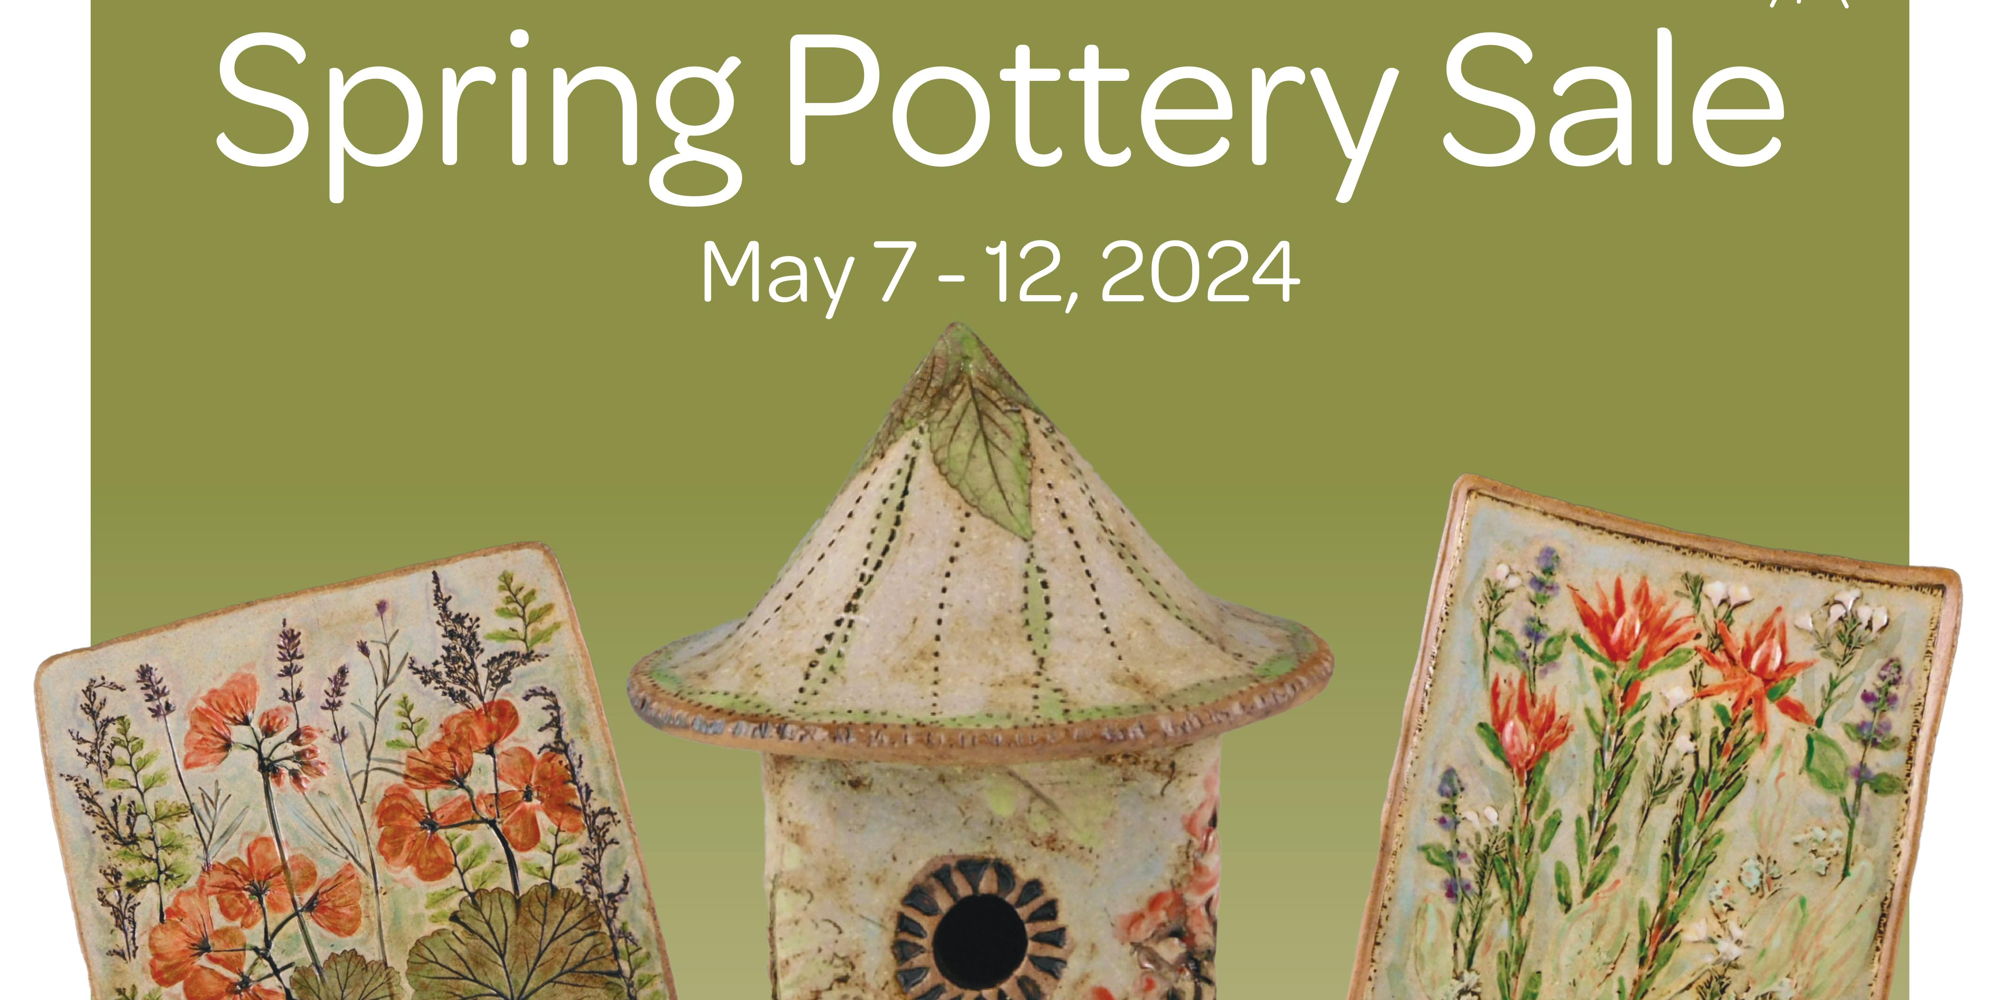 Spring Pottery Sale at the Arvada Center promotional image